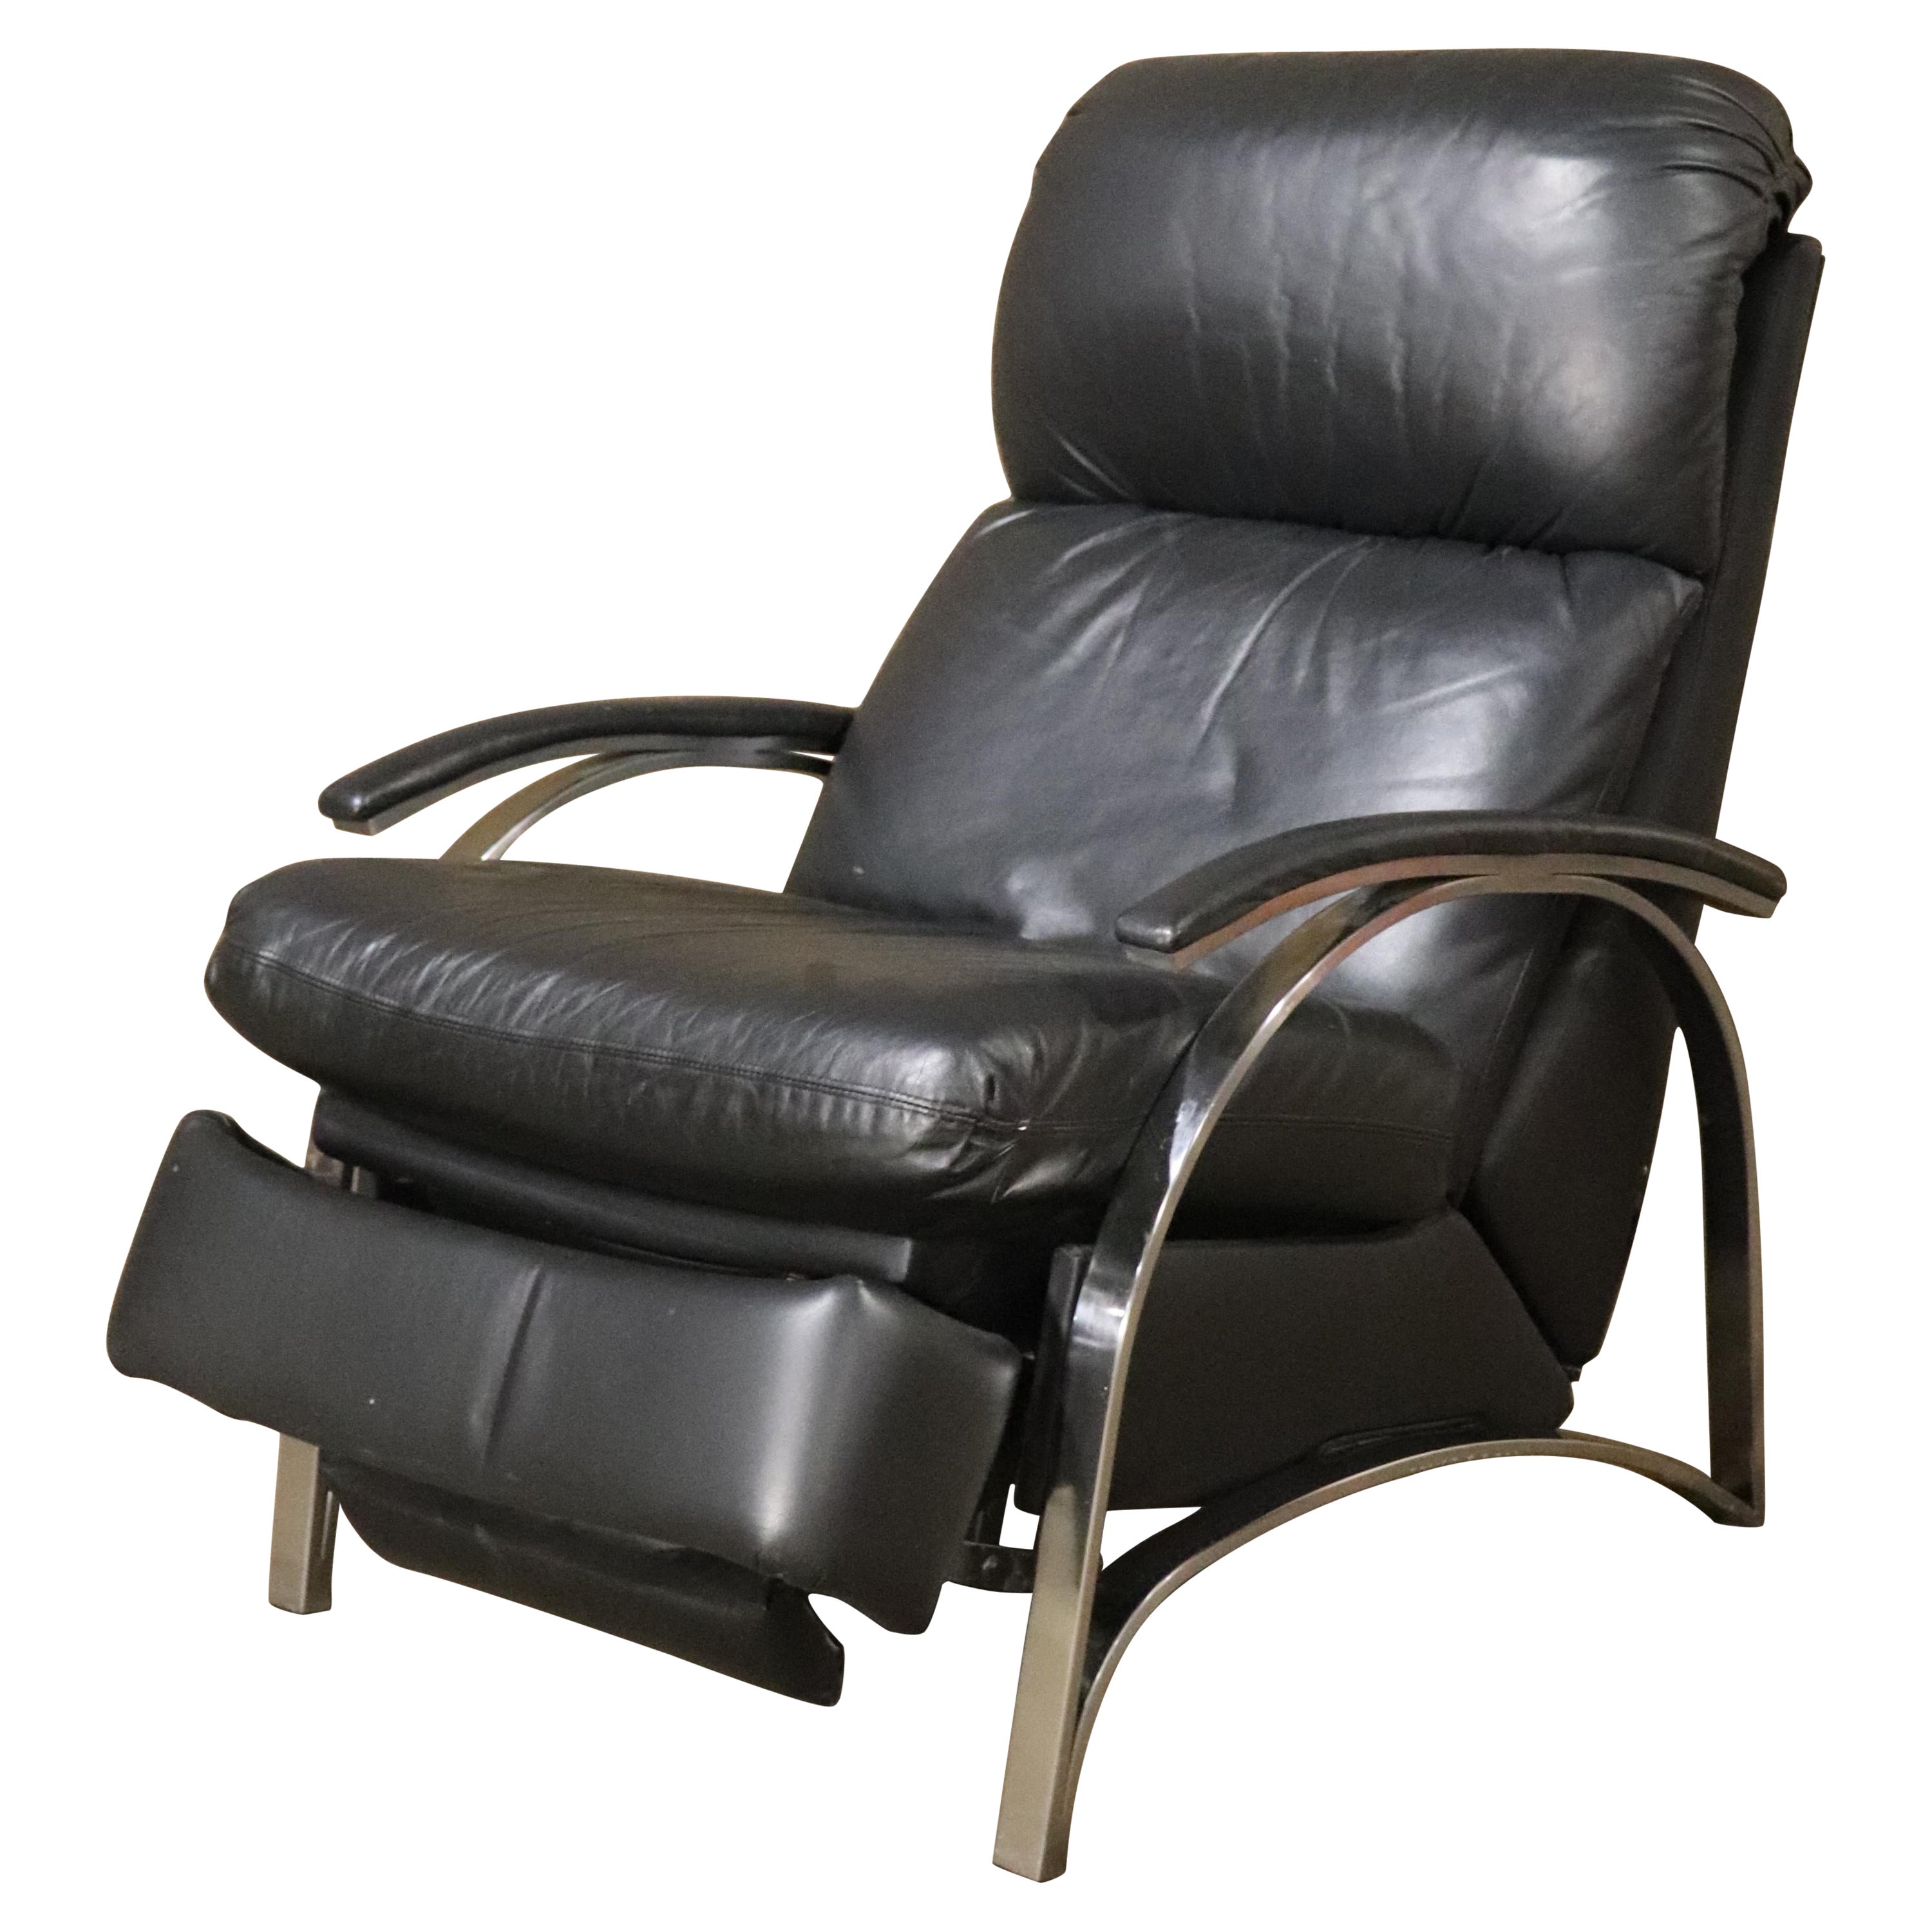 Barcalounger Spectra II Recliner For Sale